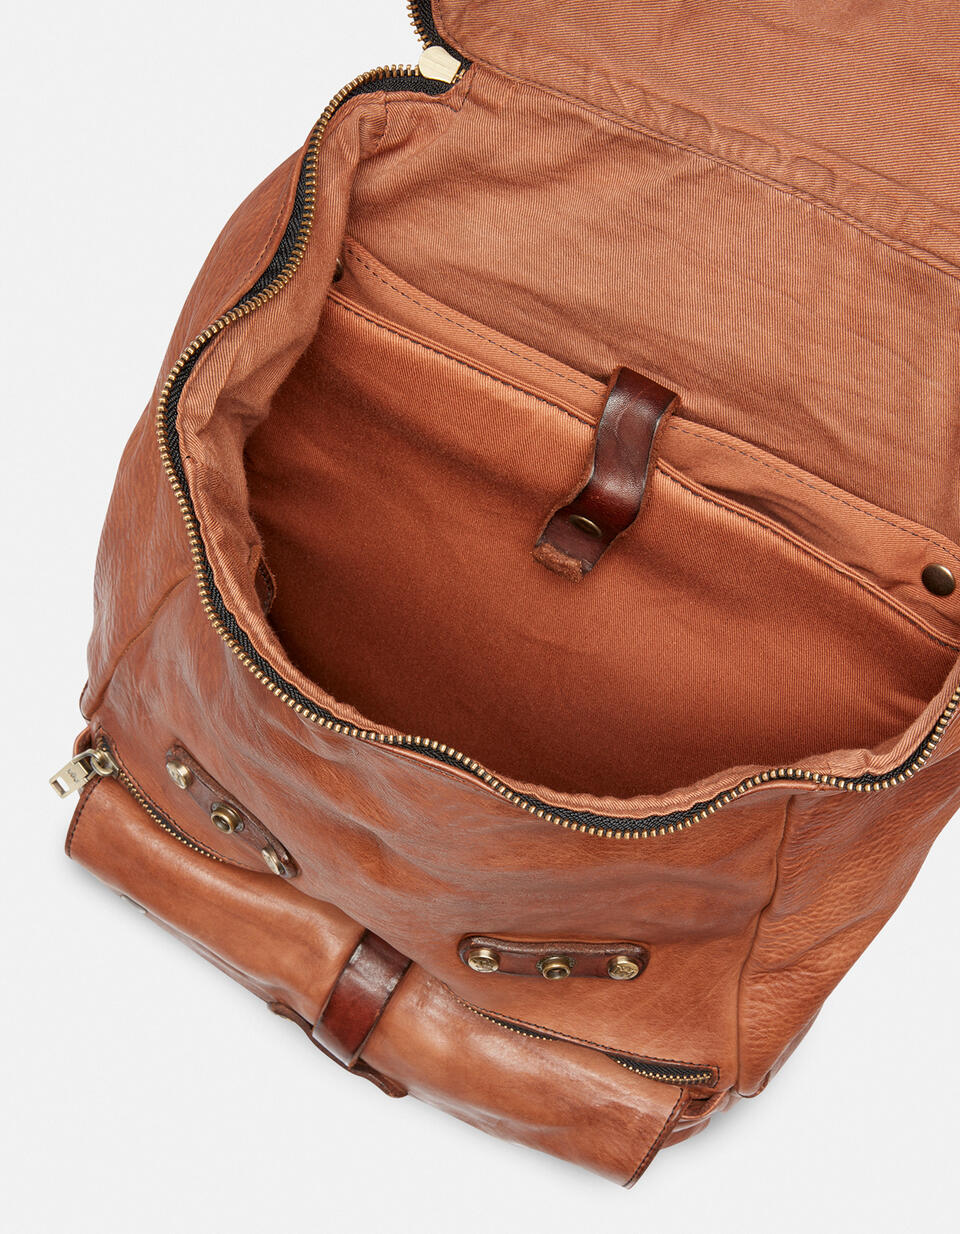 Small Millennial backpack in natural leather - Backpacks - MEN'S BAGS | bags  - Backpacks - MEN'S BAGS | bagsCuoieria Fiorentina